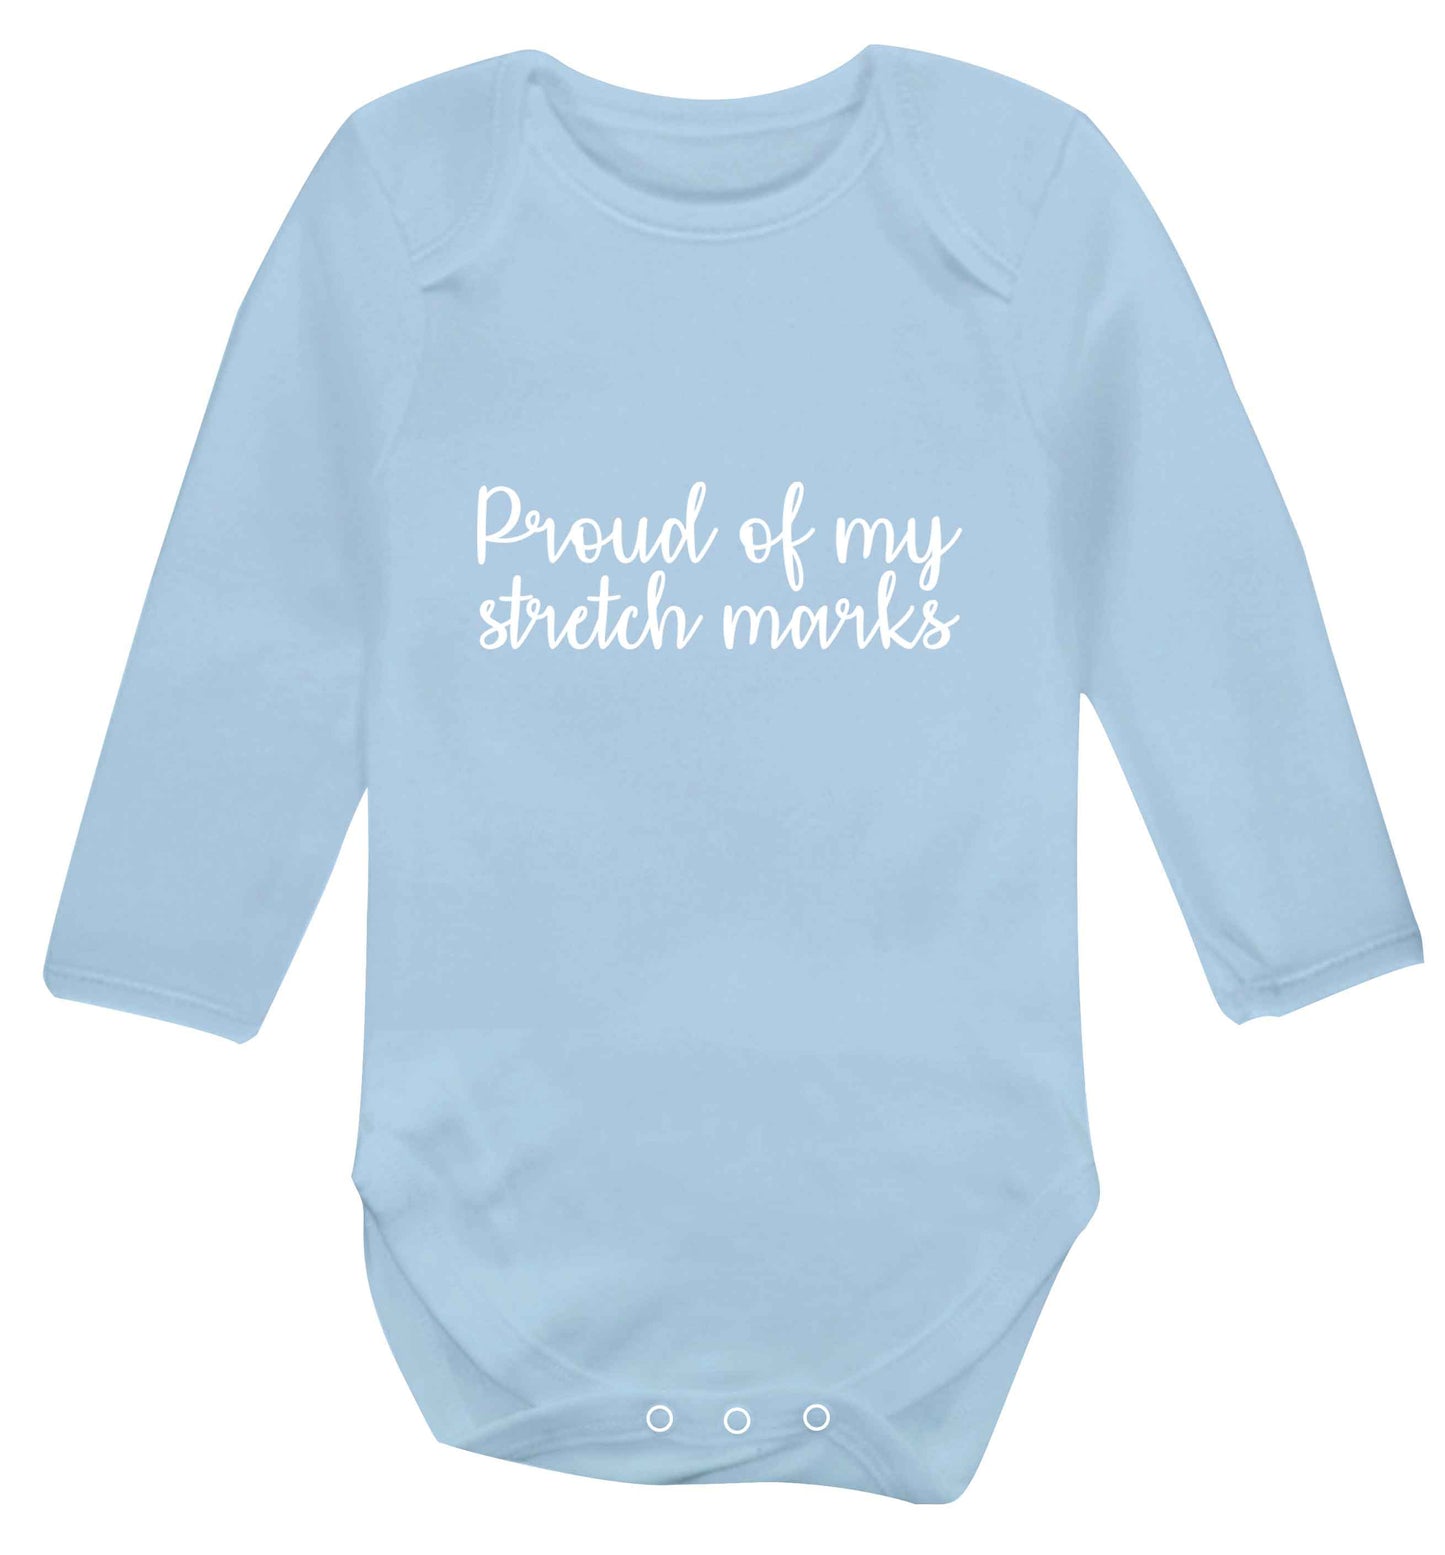 Proud of my stretch marks baby vest long sleeved pale blue 6-12 months